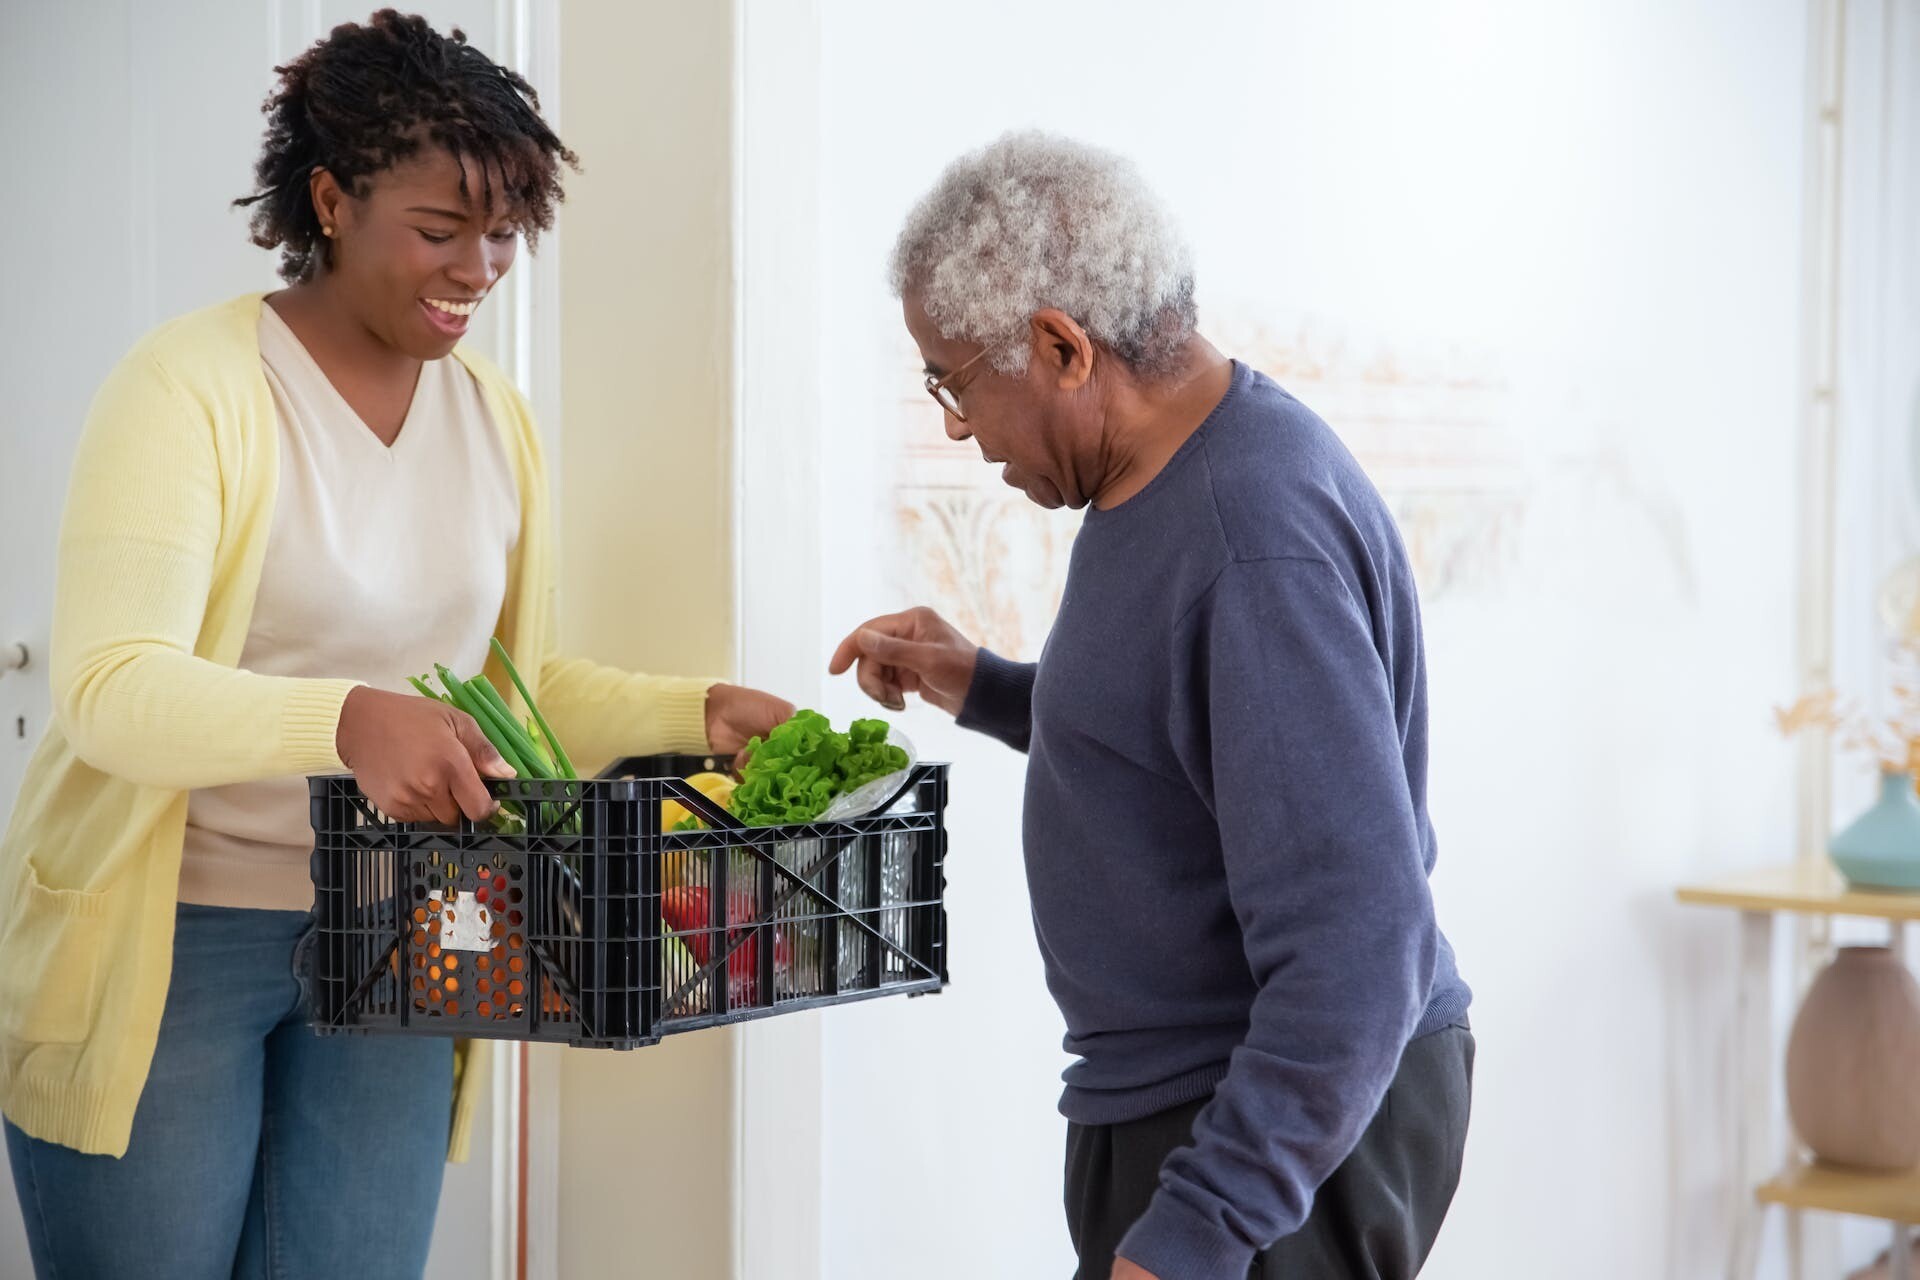 A woman holding a plastic crate with fruits and vegetables, illustrating healthy habits. Life insurance is important for the elderly as well as younger generations.